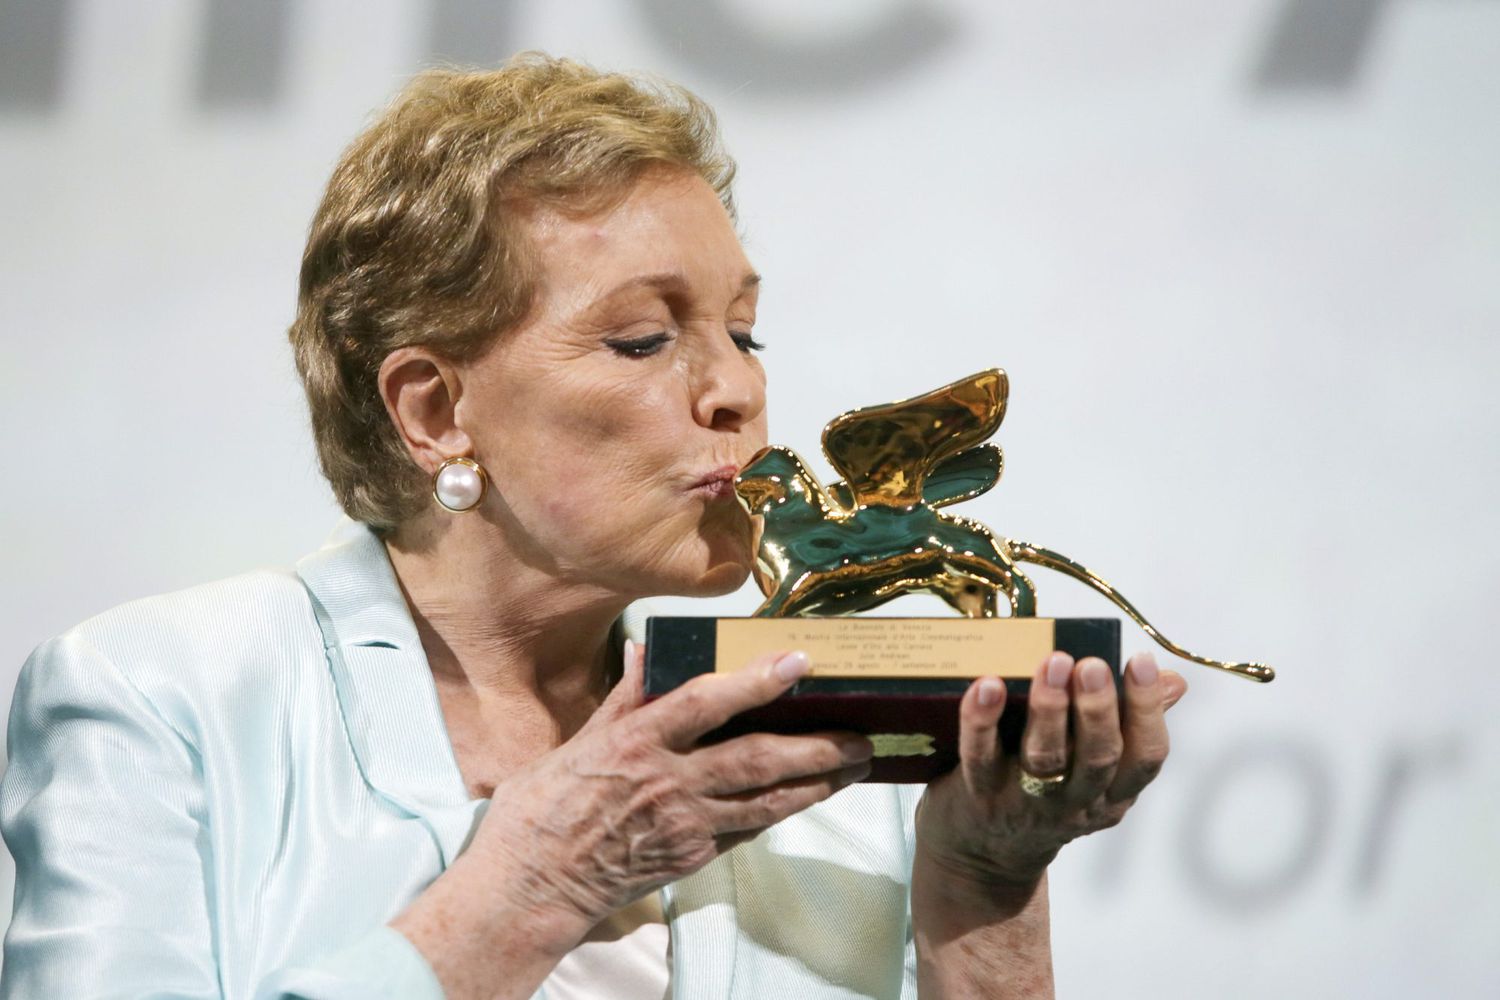 VENICE, ITALY - SEPTEMBER 02: Julie Andrews is awarded the Golden Lion for Lifetime Achievement during the 76th Venice Film Festival at Sala Grande on September 02, 2019 in Venice, Italy. (Photo by Daniele Venturelli/Venturelli Daniele/WireImage, )